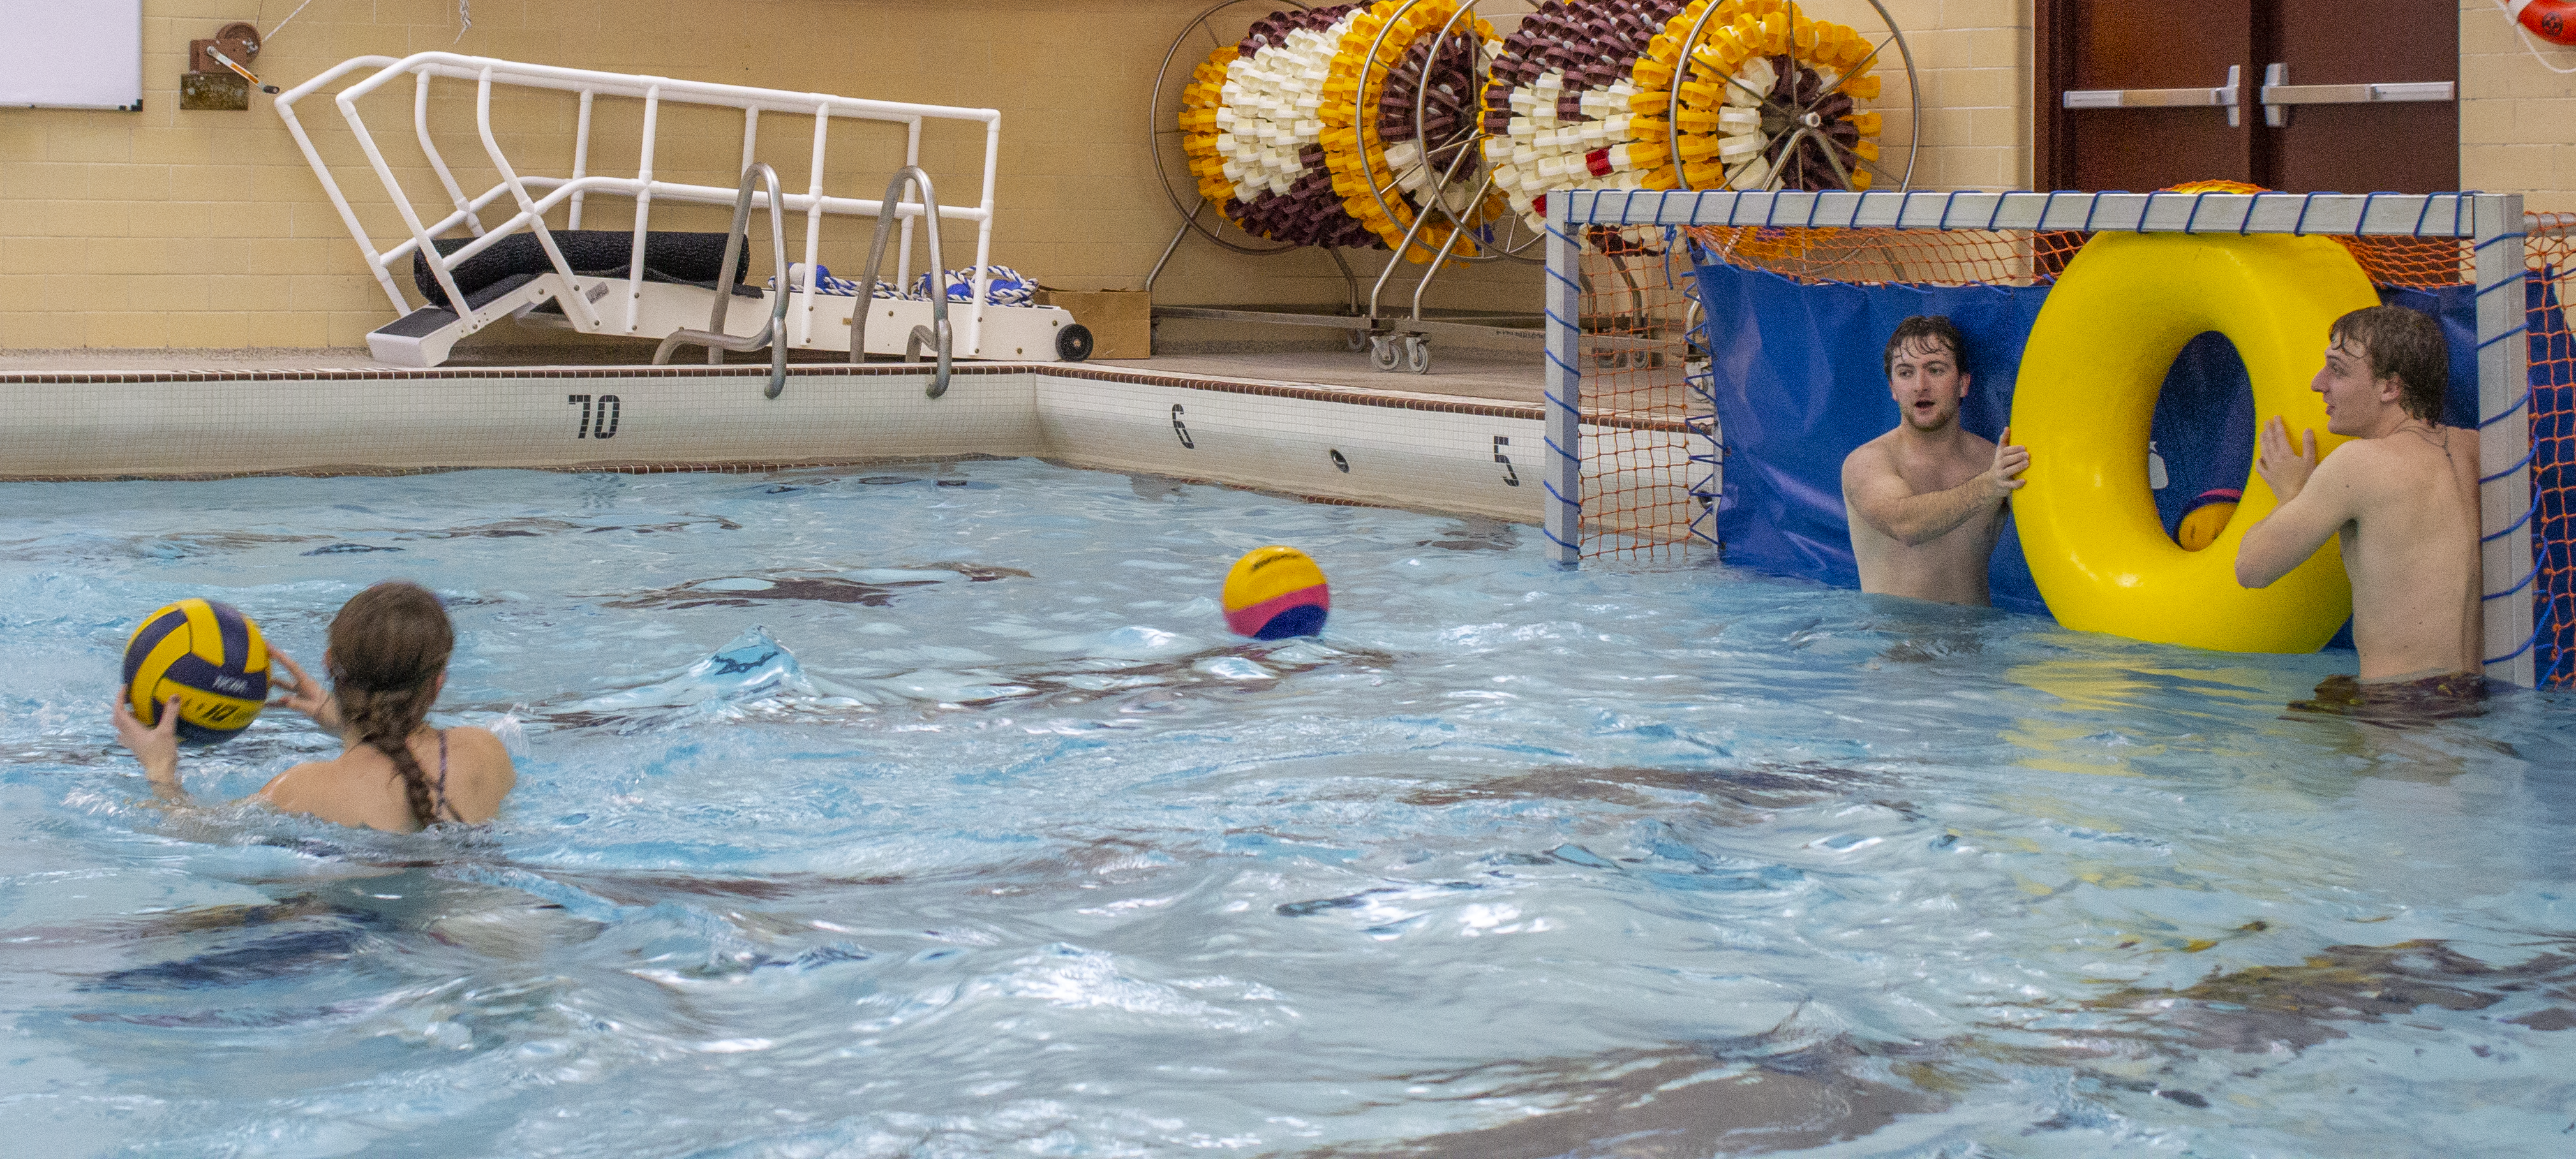 students playing water polo in the pool